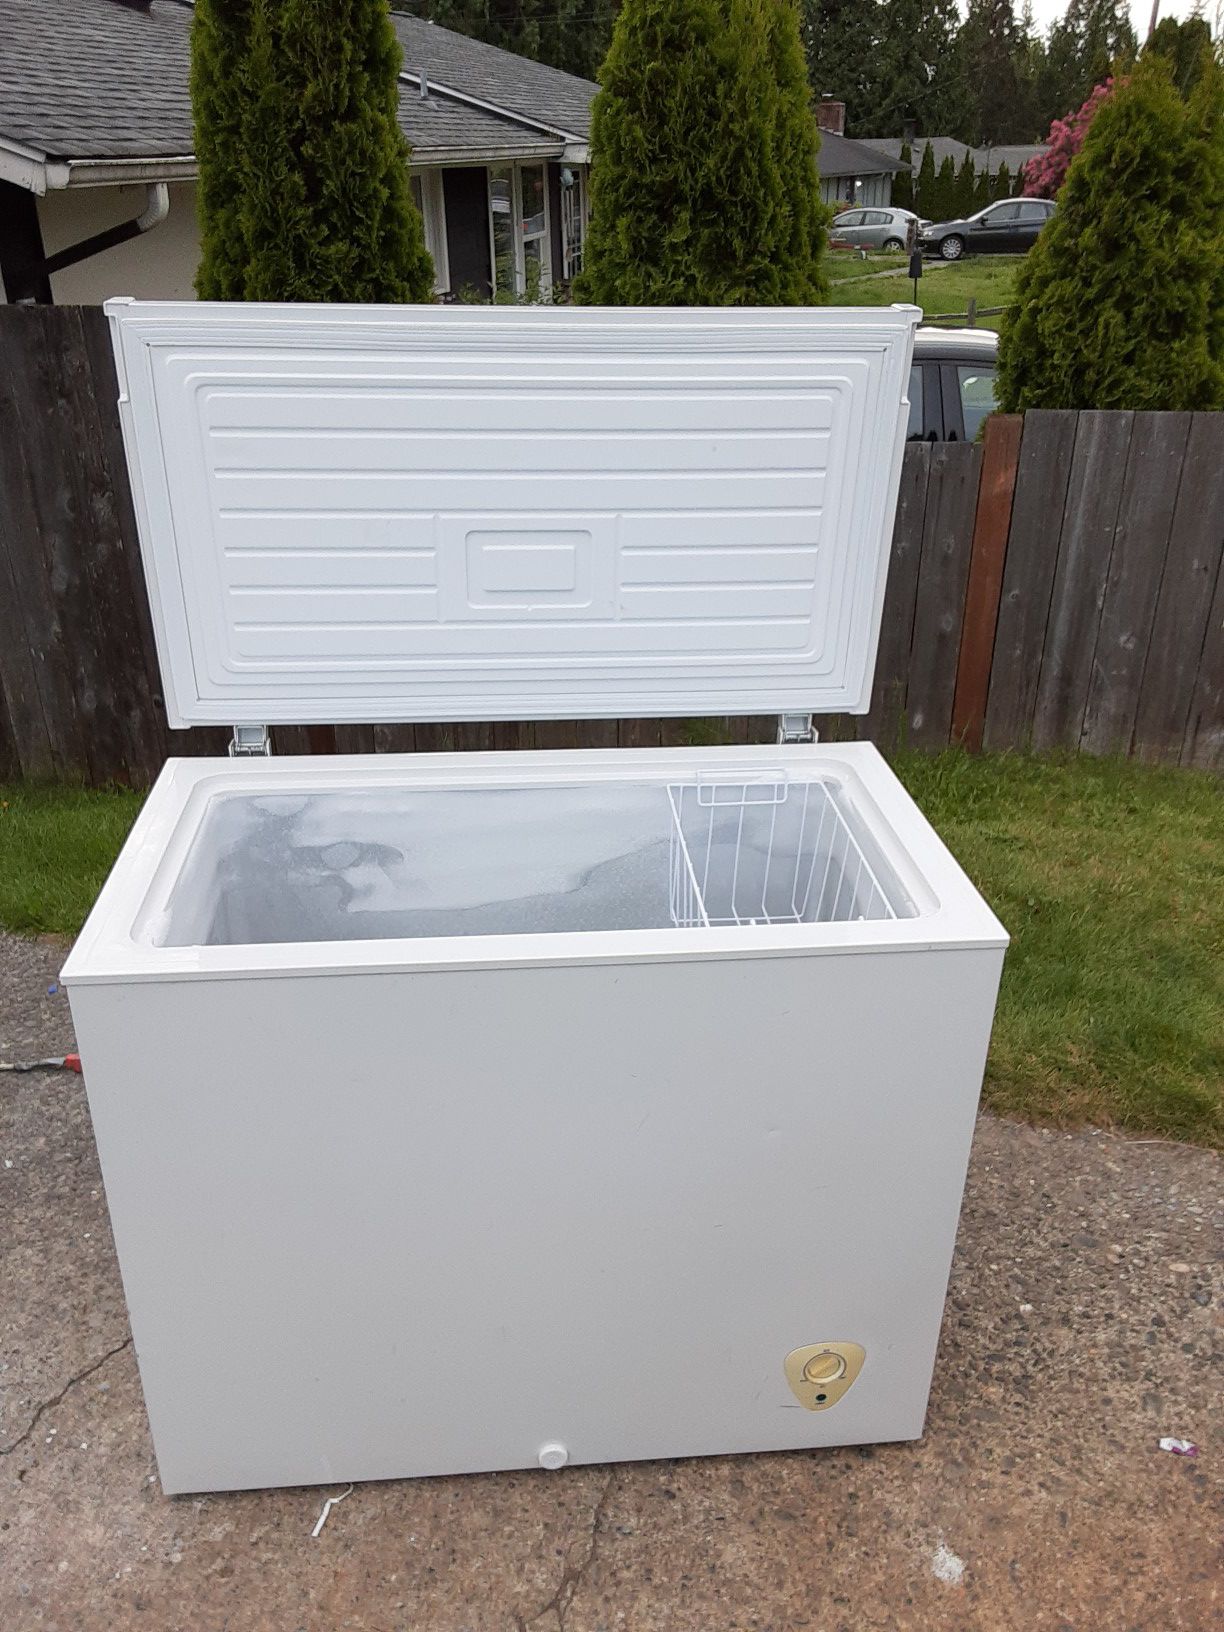 Kenmore Chest Freezer 7 Cubic Feet Delivery Is Available Firm On My Price